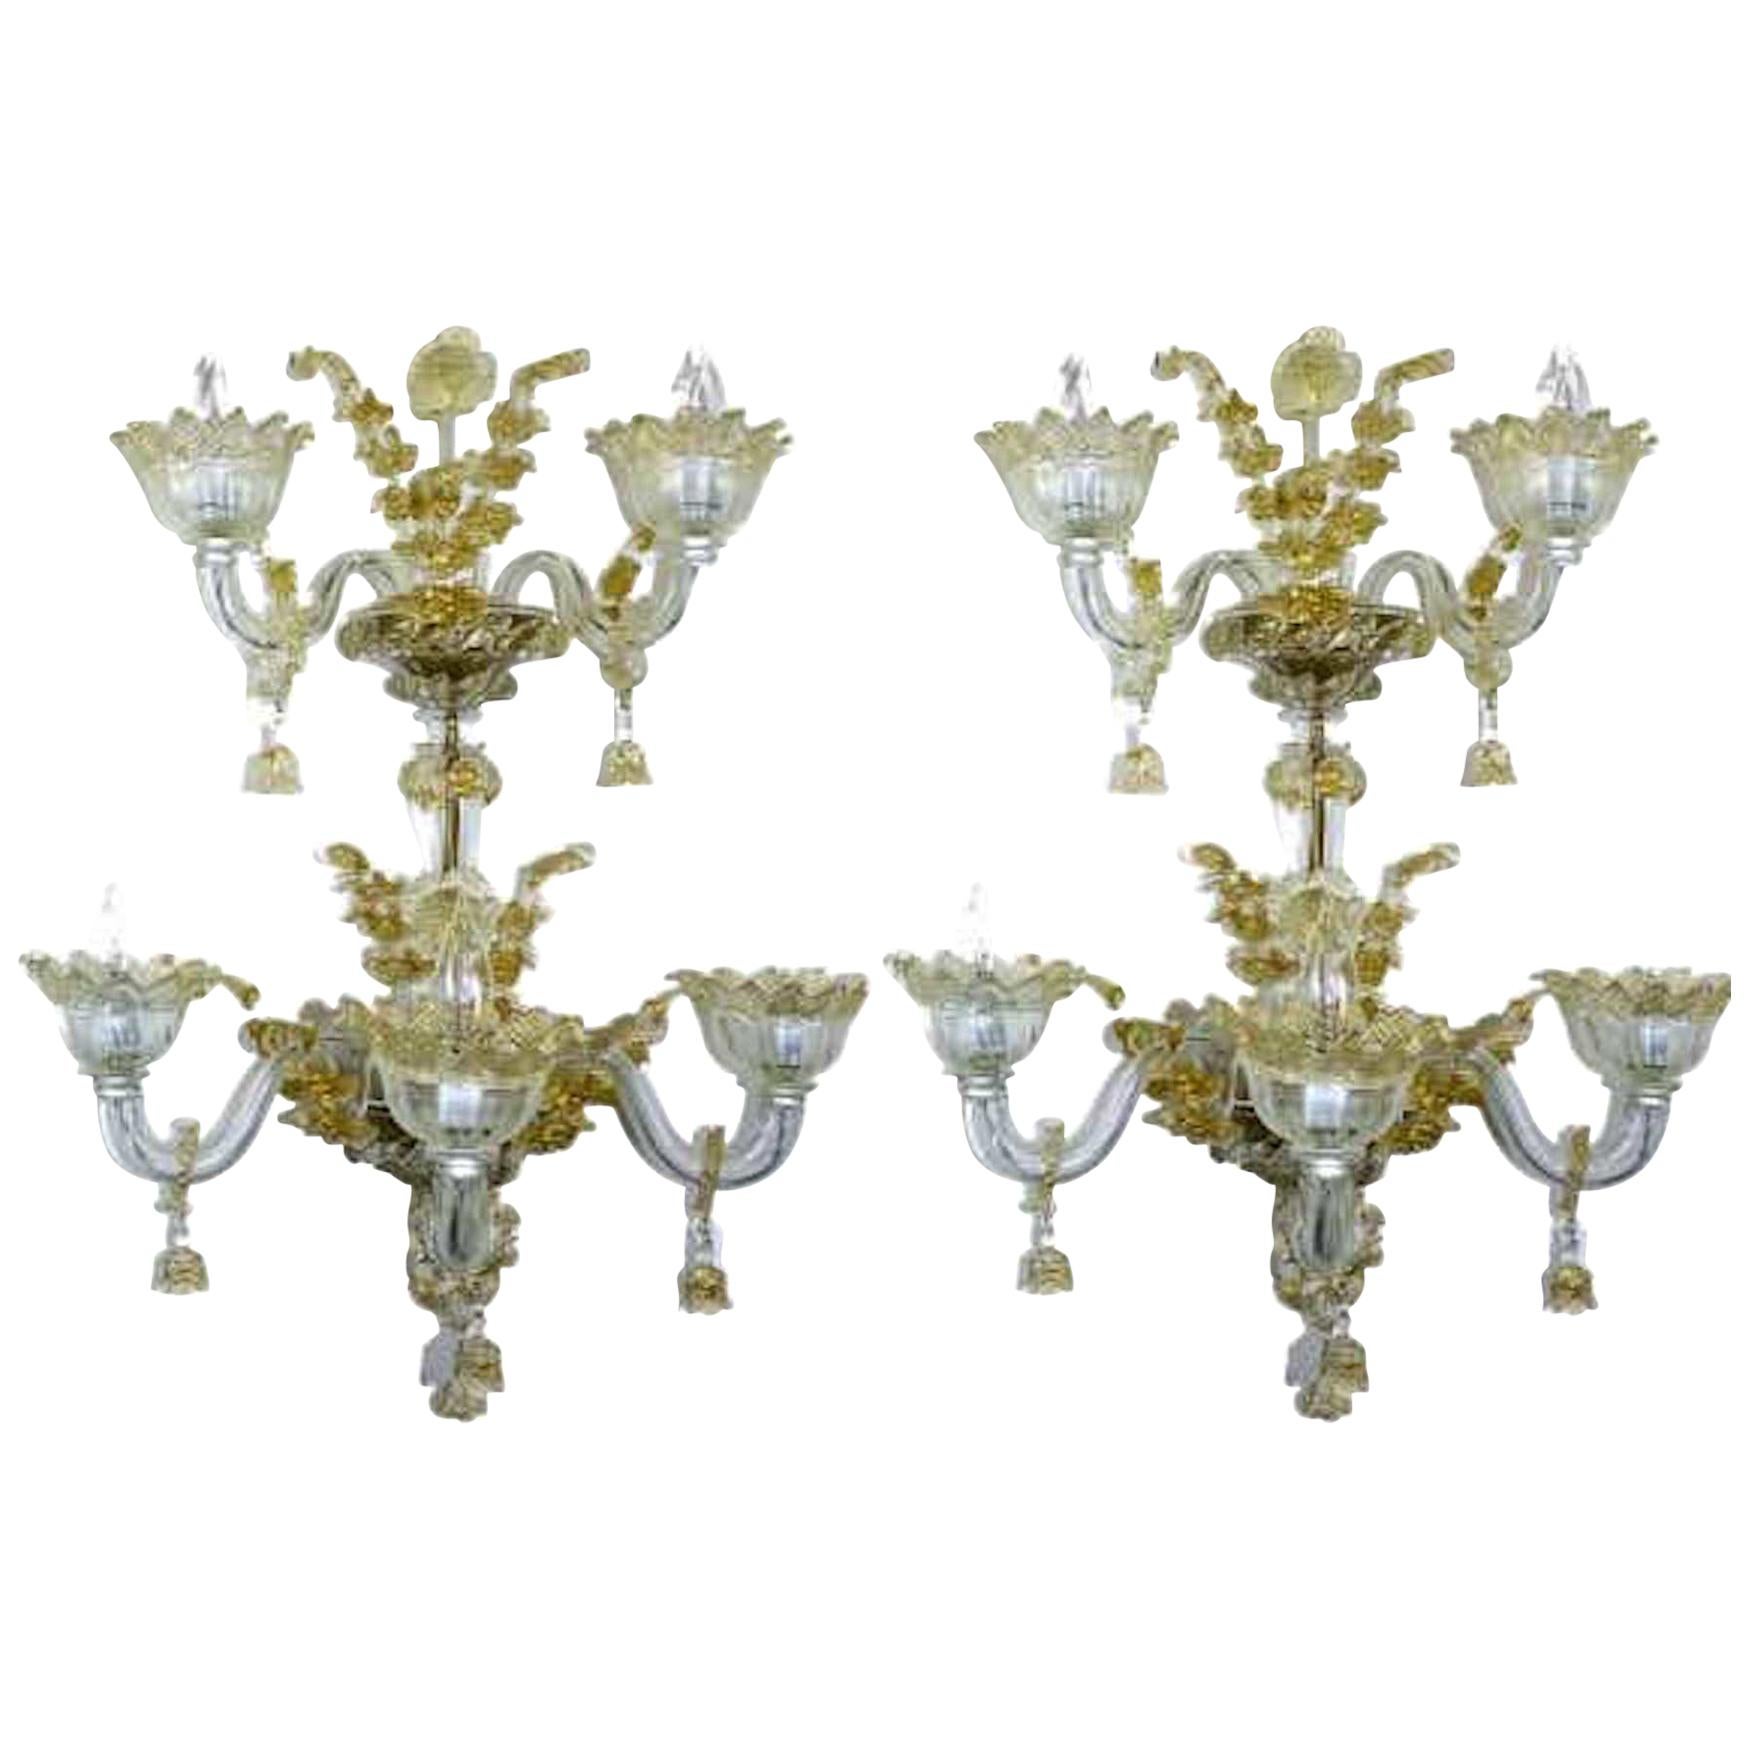 Spectacular Venetian Italian Gold Infused Murano Glass Sconces, 3 Pair Available